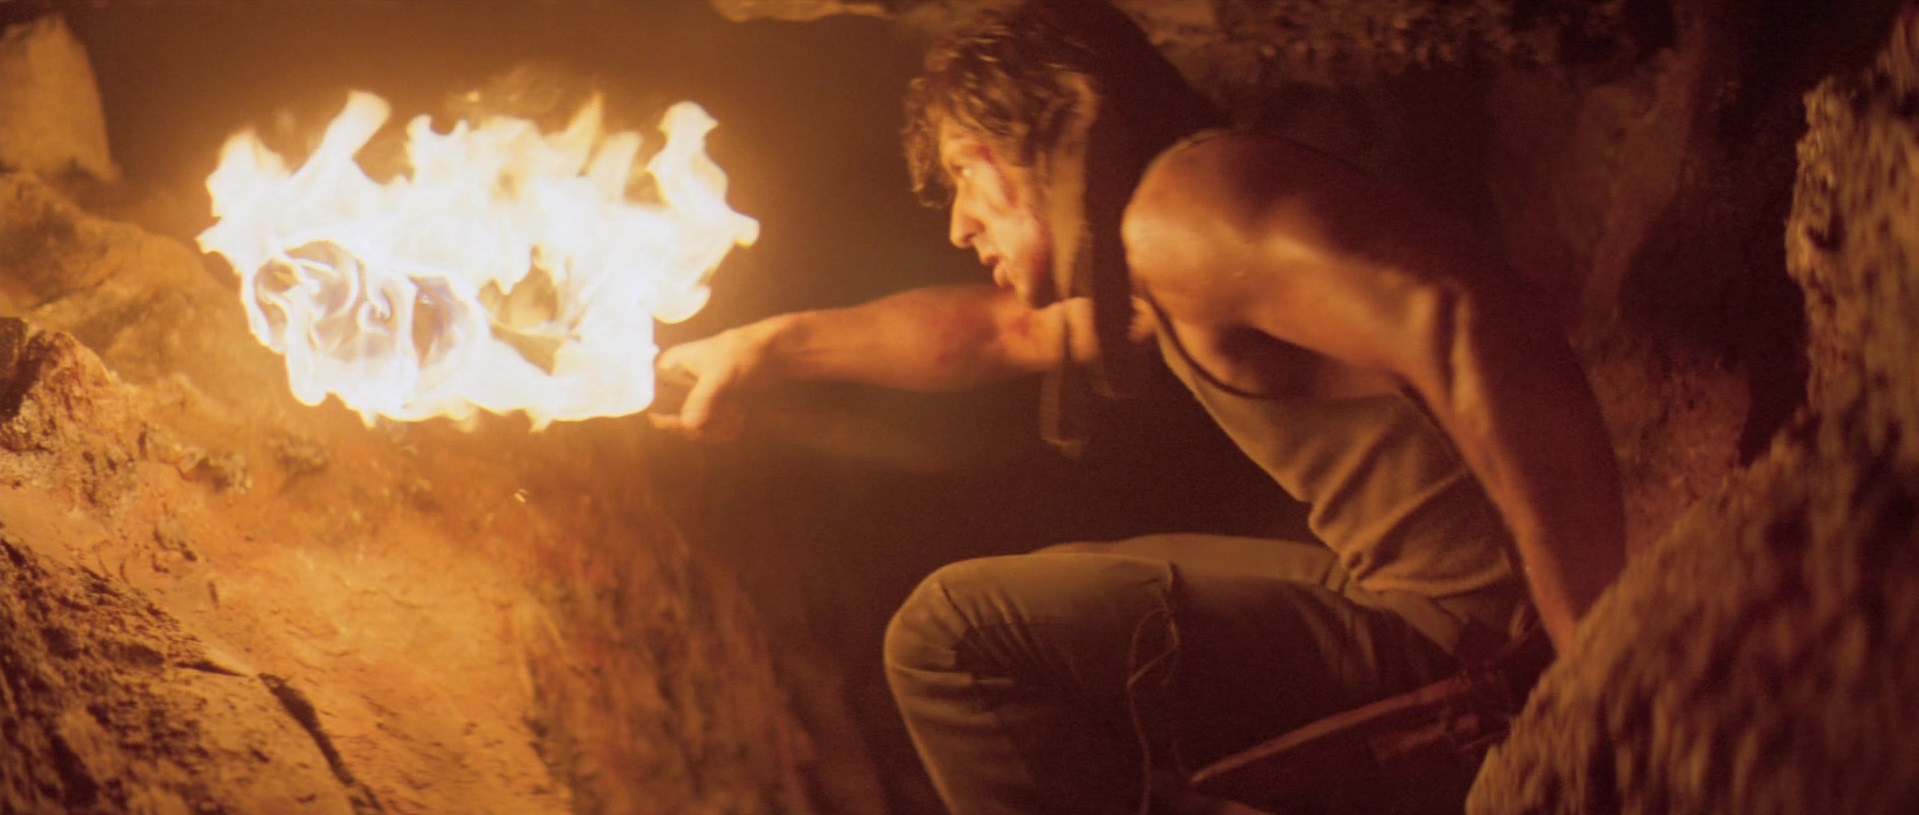 Rambo lights a fire in an old mine